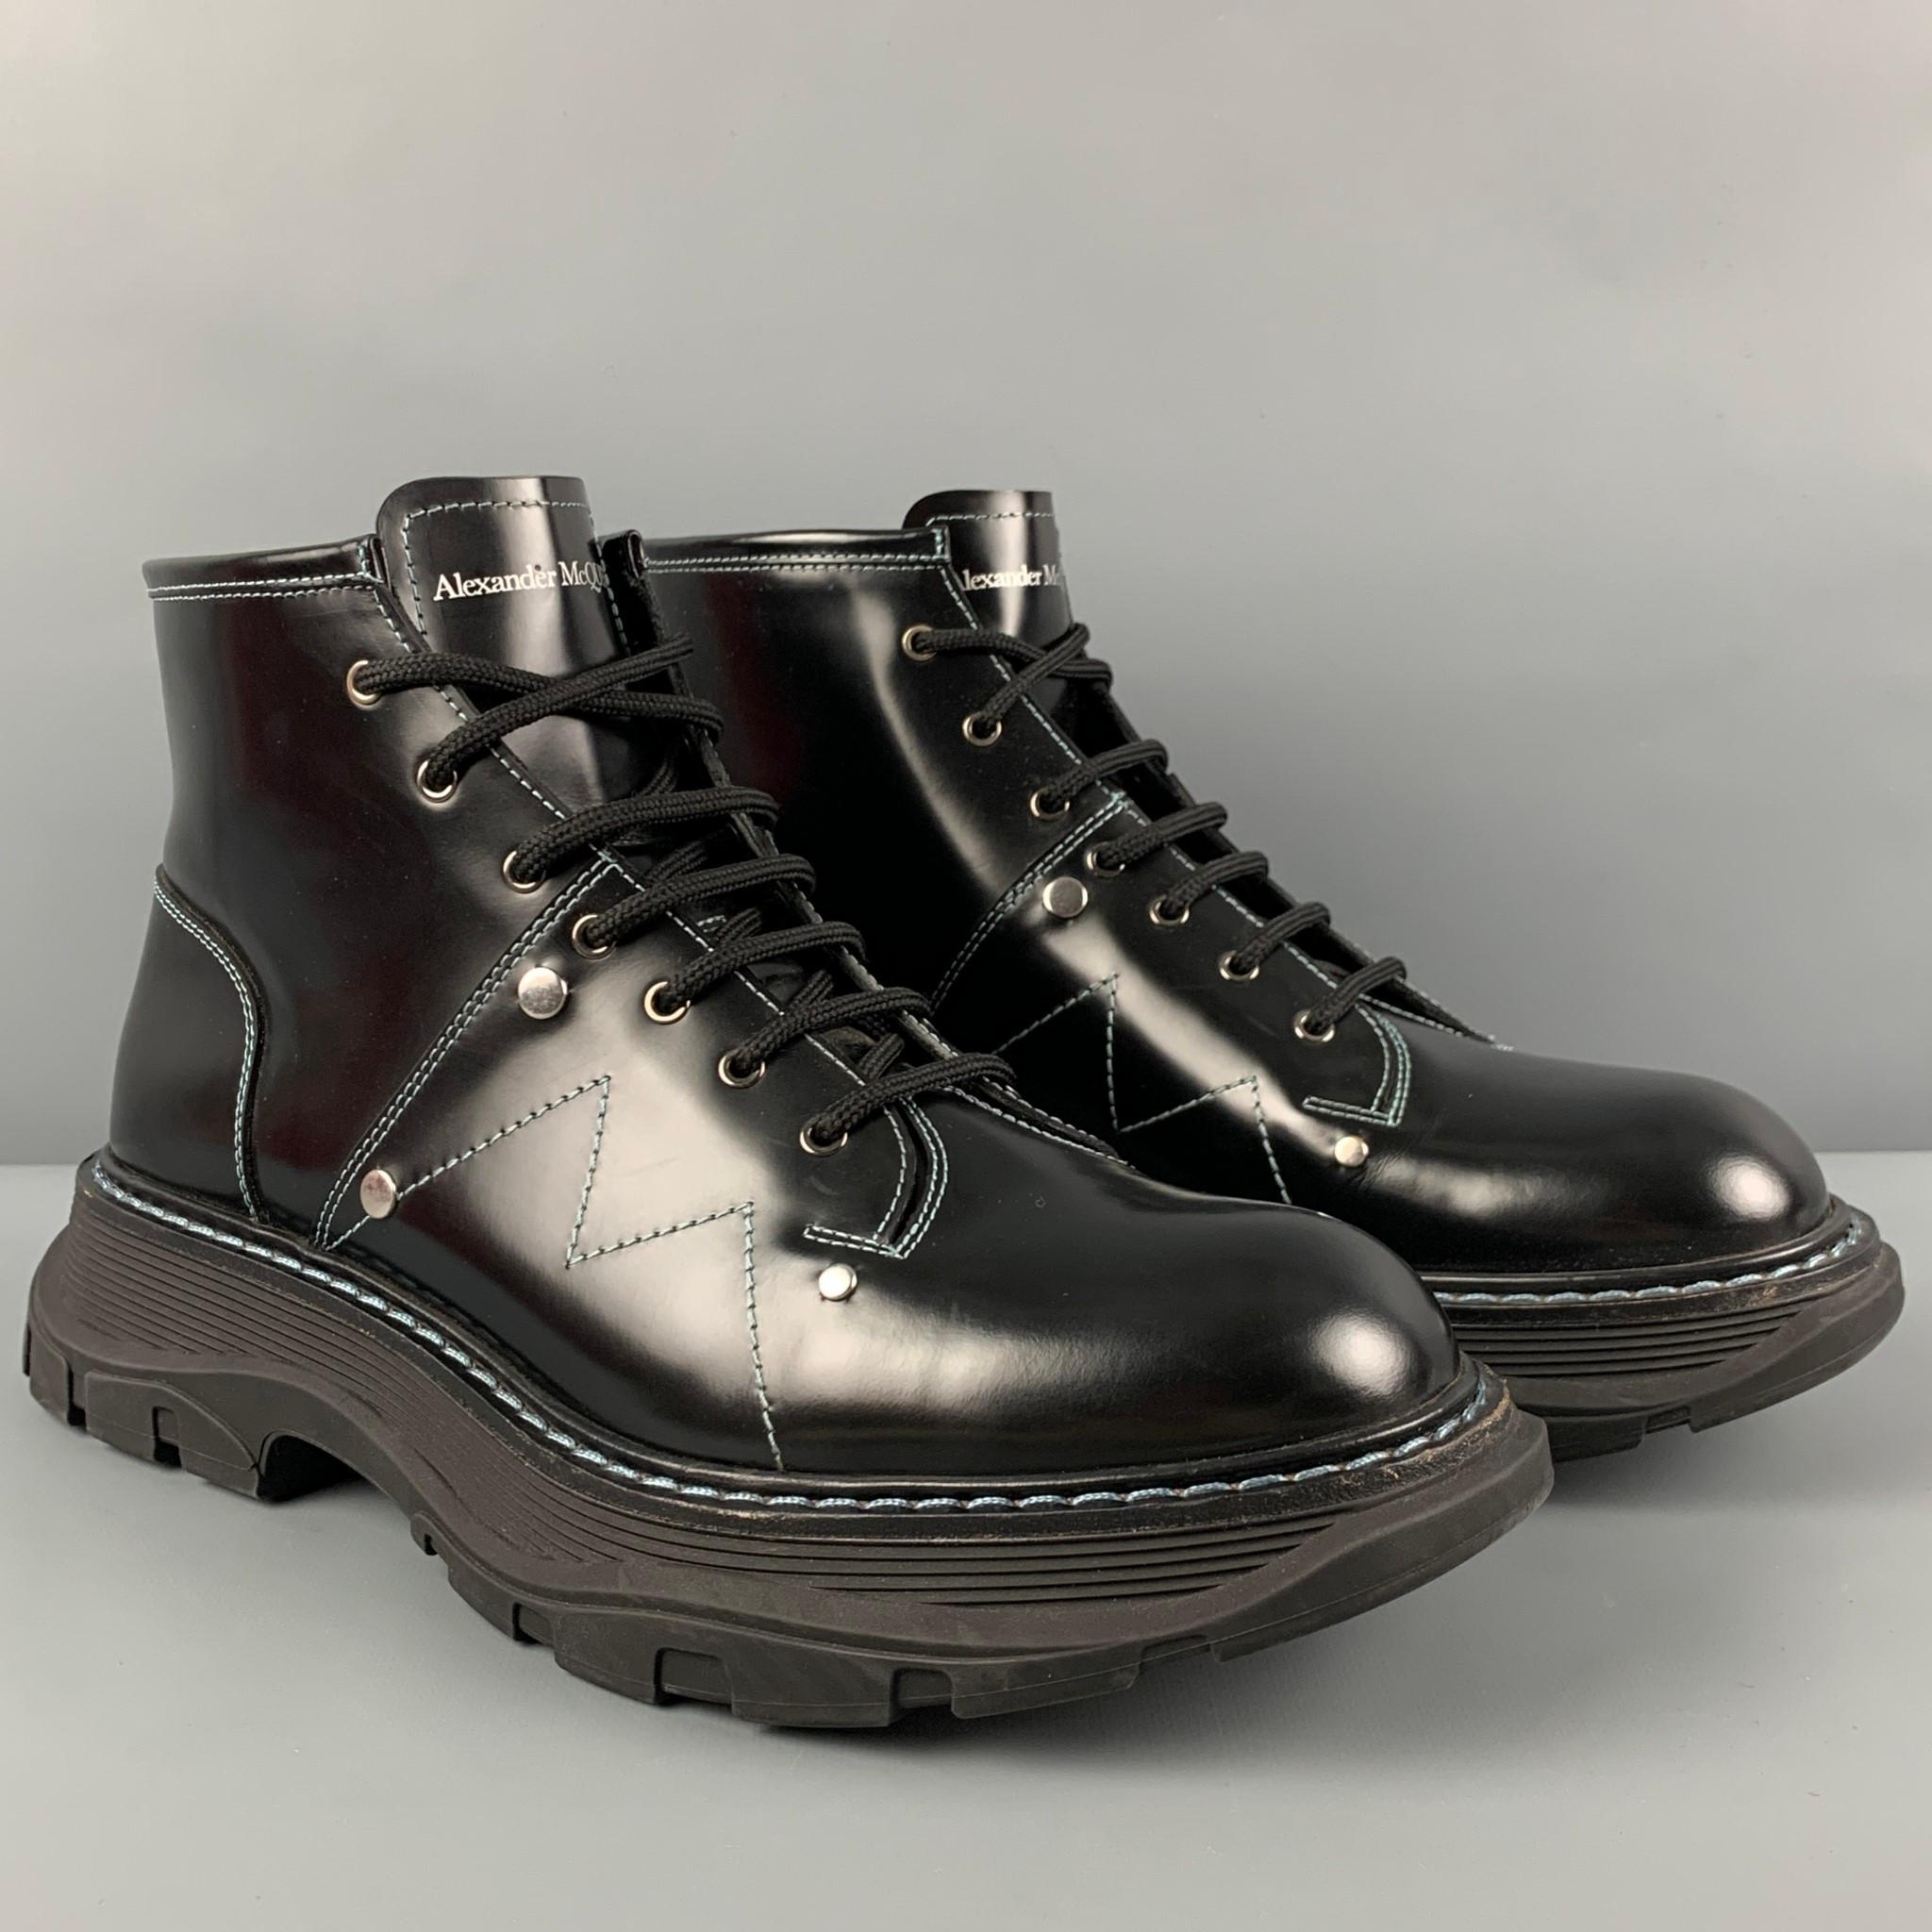 ALEXANDER McQUEEN boots comes in a black leather featuring a high top style, contrast stitching, chunky rubber sole, and a lace up closure. Includes box. Made in Italy. 

Excellent Pre-Owned Condition.
Marked: 604253 44 D
Original Retail Price: